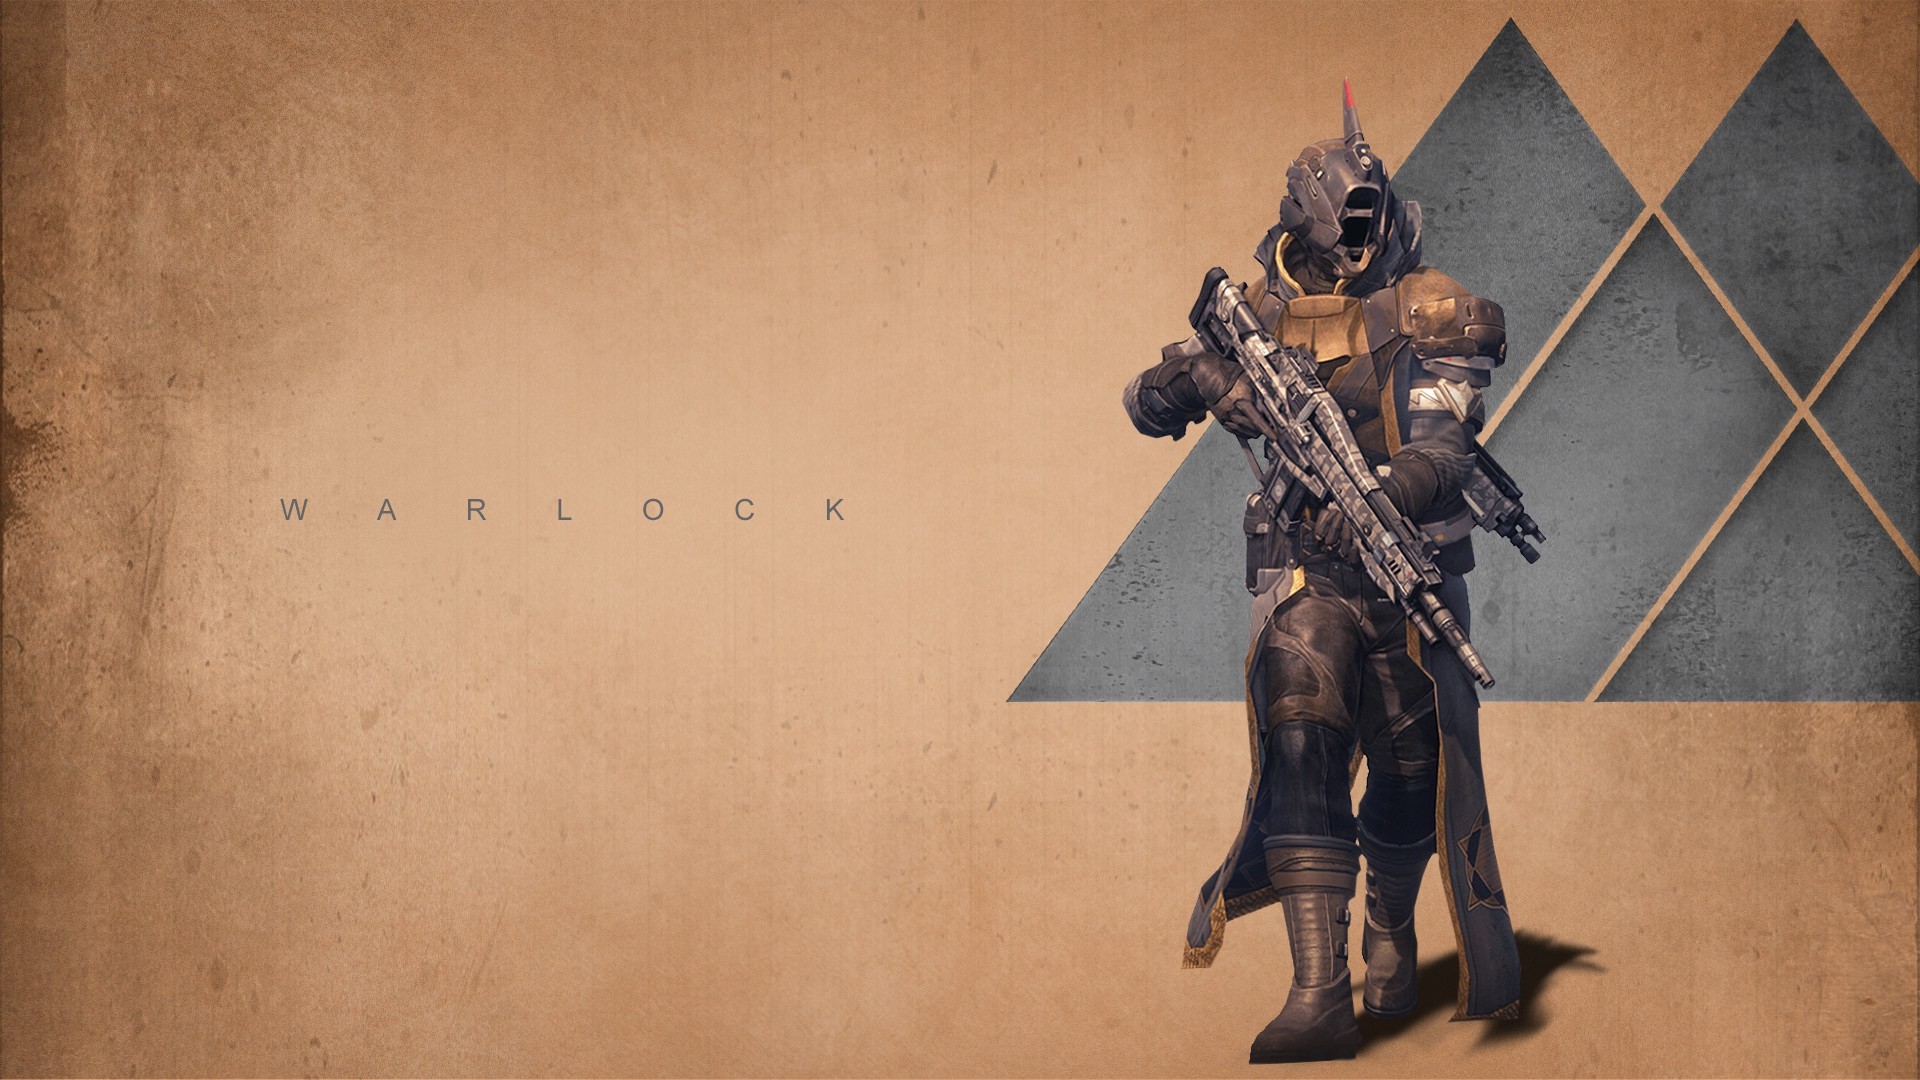 1920x1080 Also you can check out a ton more Destiny wallpapers here.